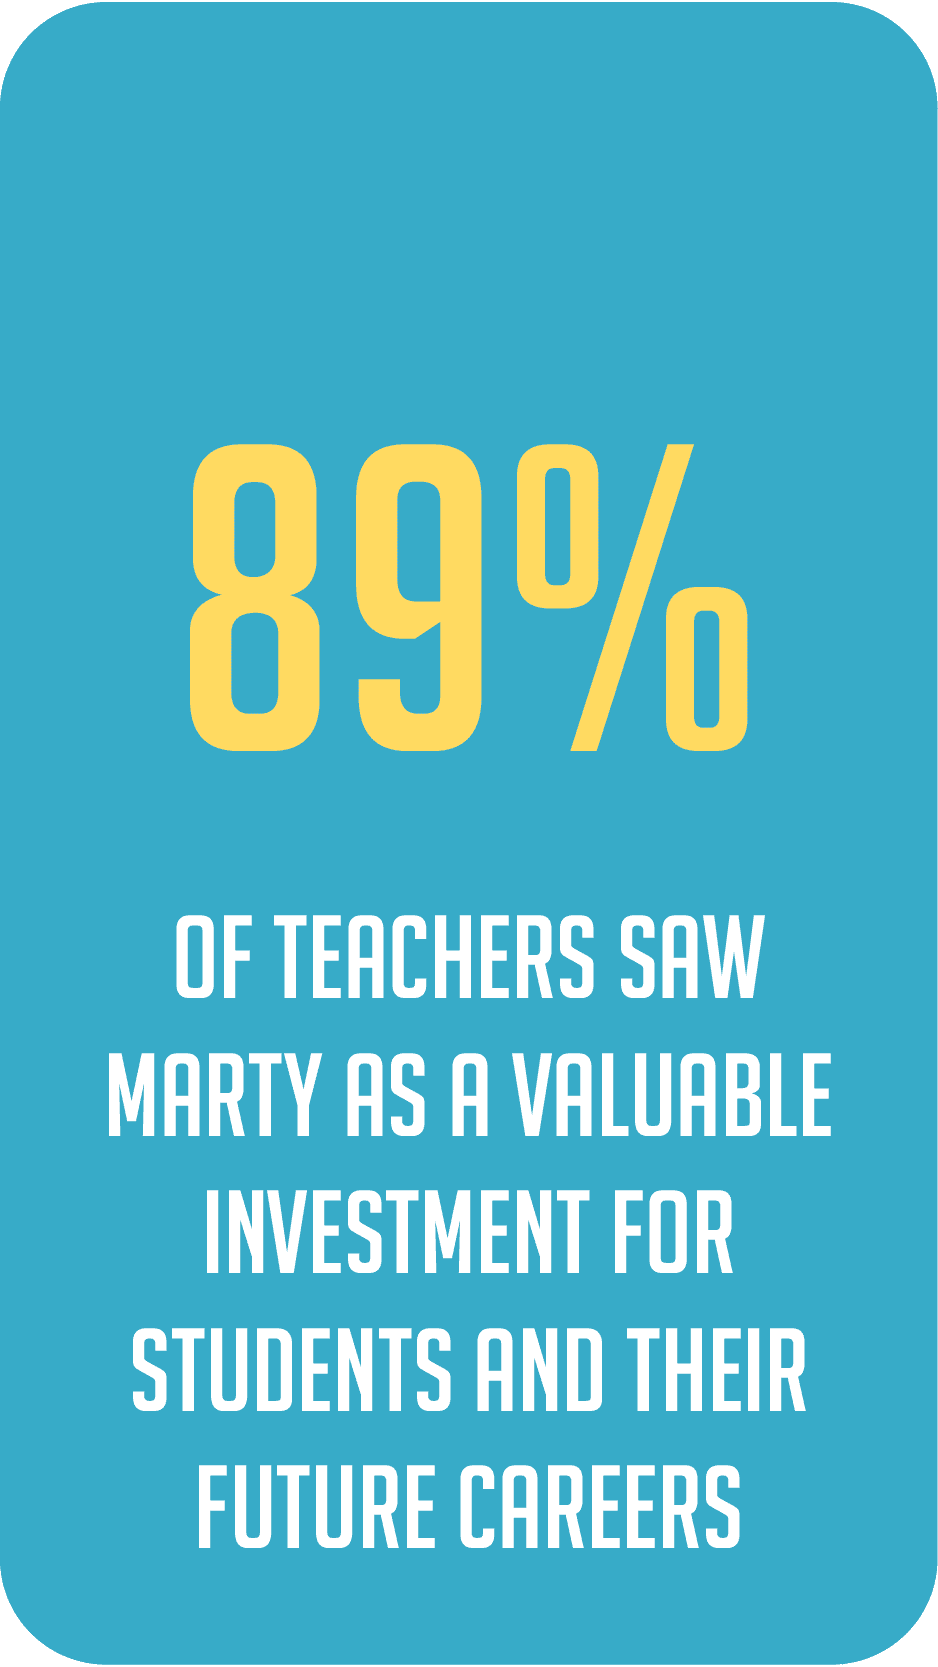 89% of teachers saw Marty as a valuable investment for students and their future careers.